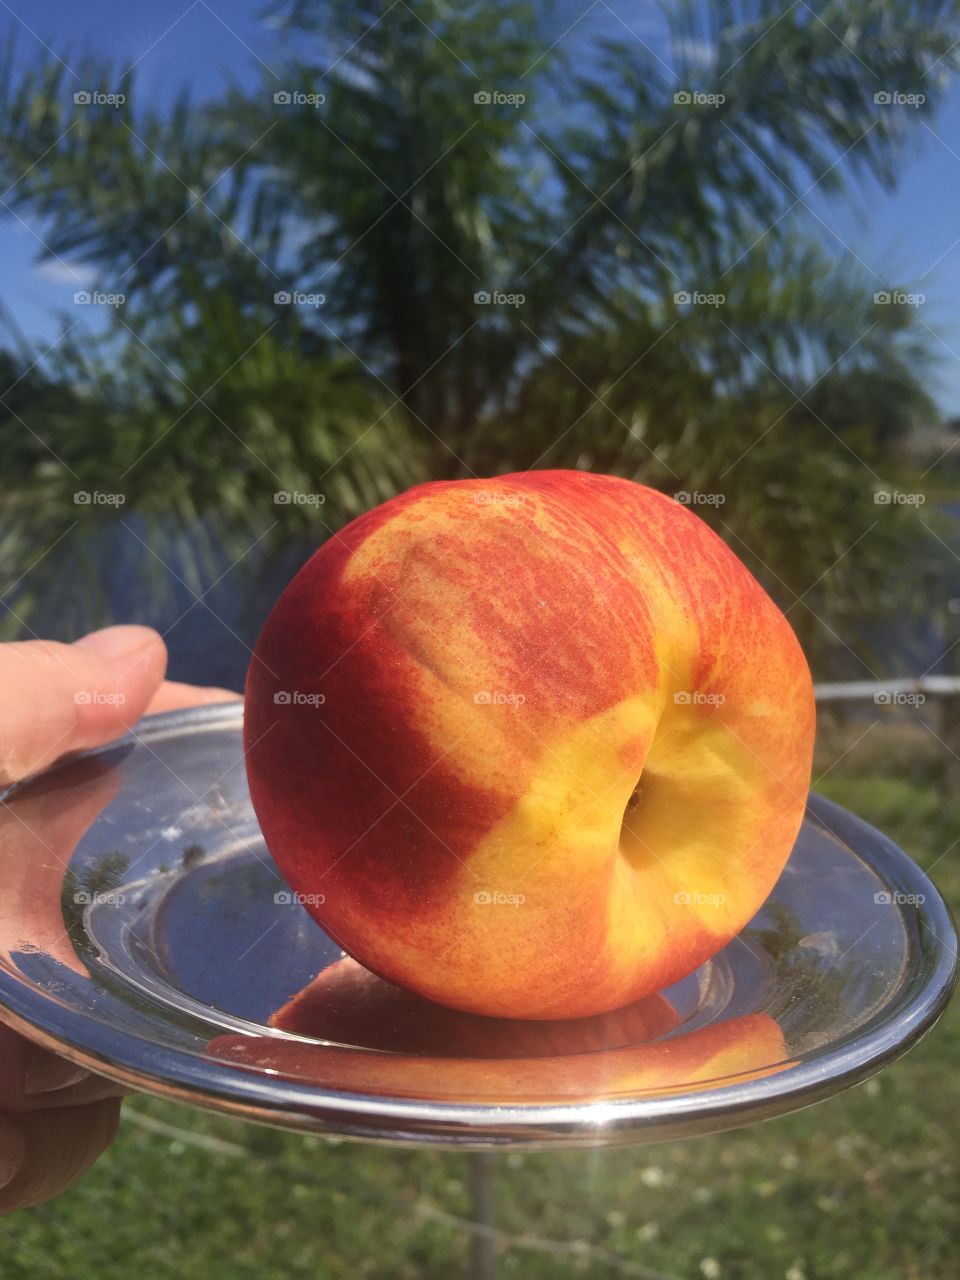 JUICY NECTARINE ON A SILVER PLATE